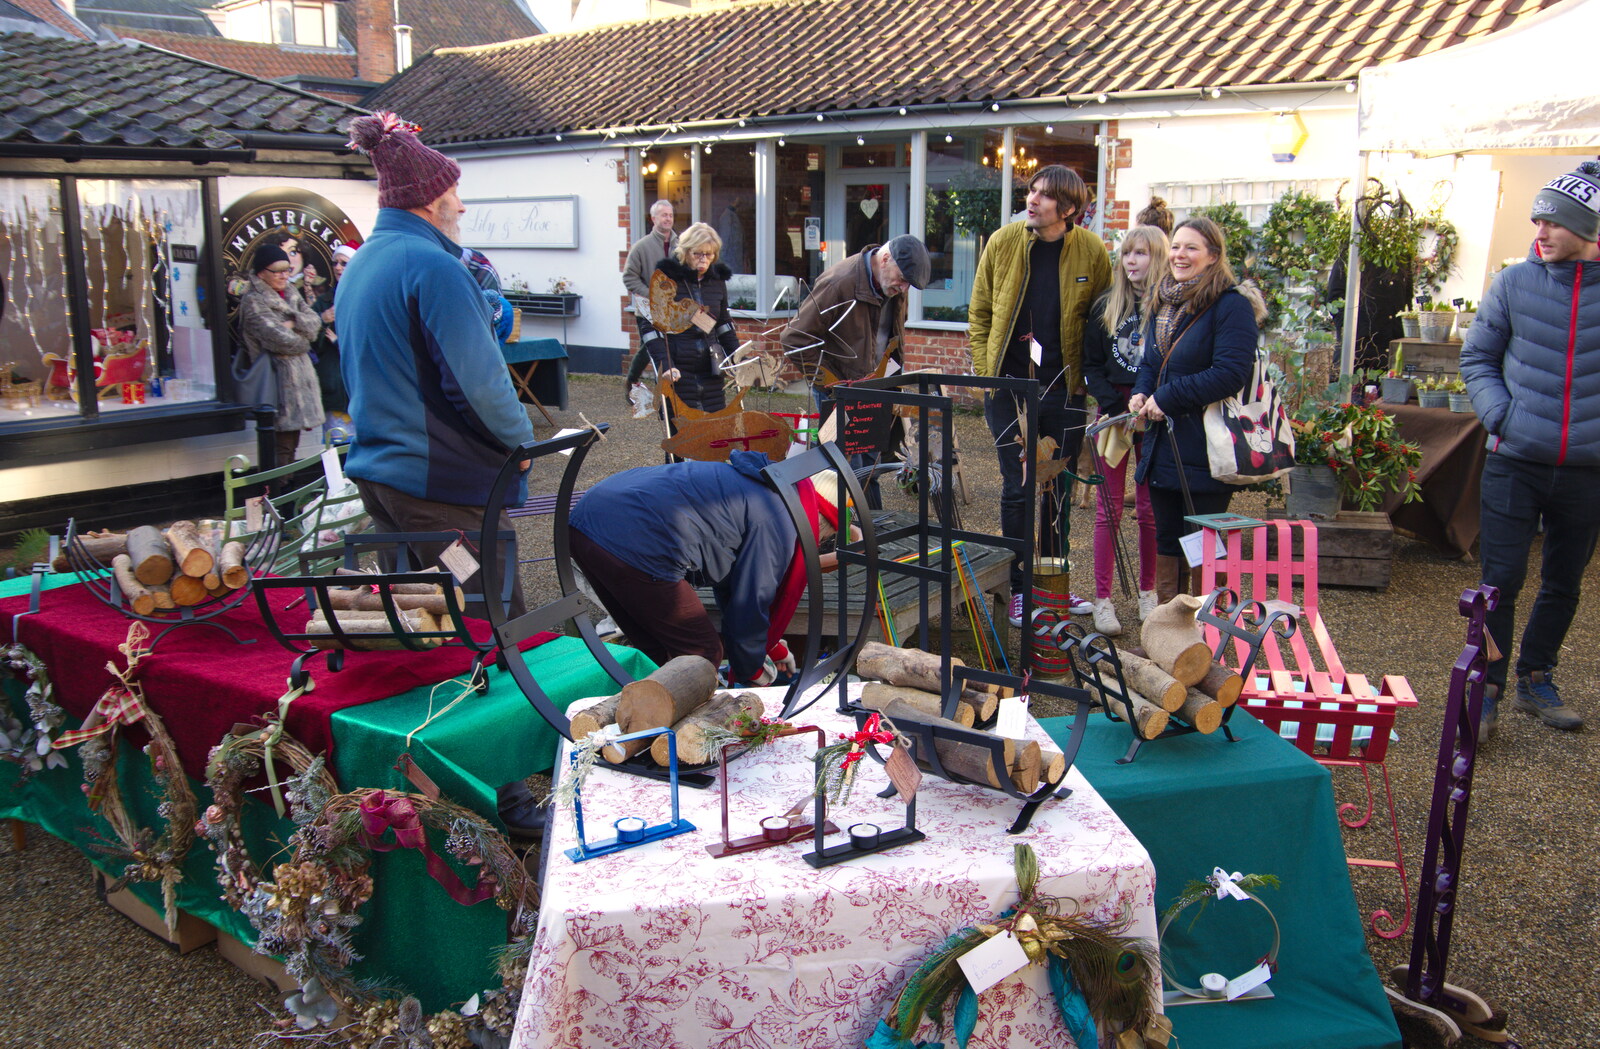 Wrought iron for sale in nearby Cobb's Yard from The St. Nicholas Street Winter Fayre, Diss, Norfolk - 14th December 2019